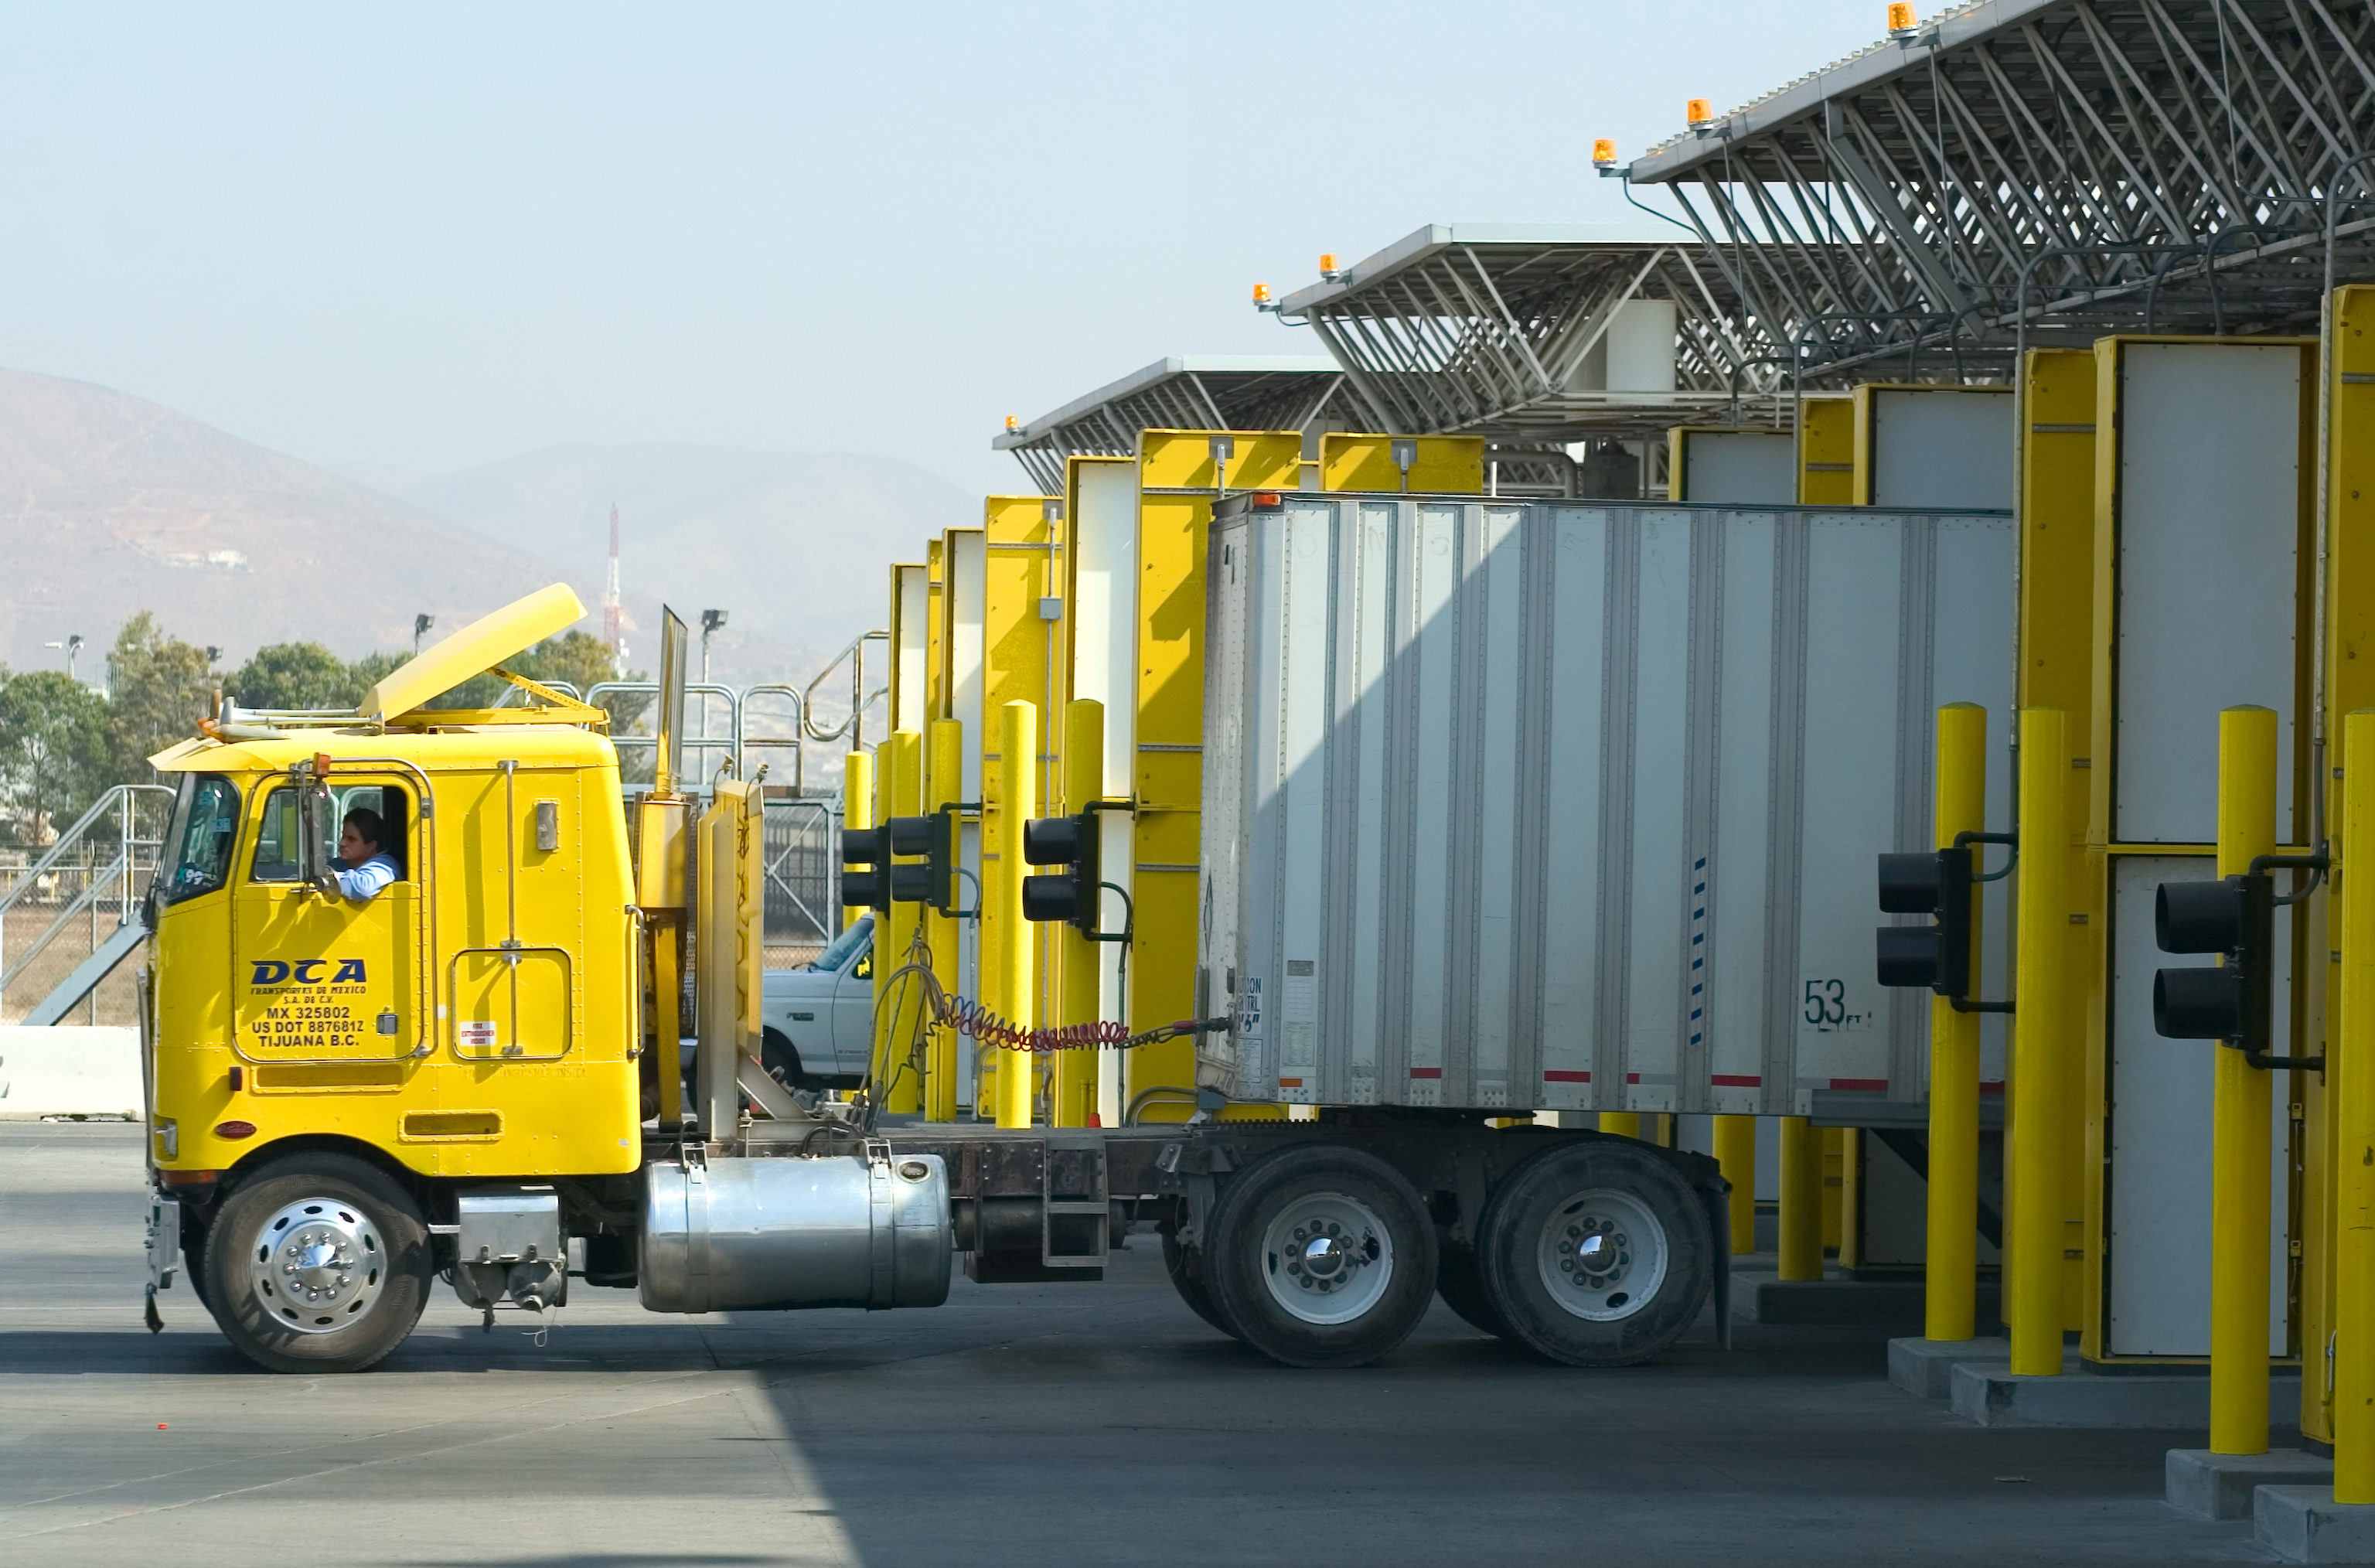 Trucks bring products into the U.S. through the Otay Mesa border crossing where CBP Agriculture Specialists inspect their cargo.